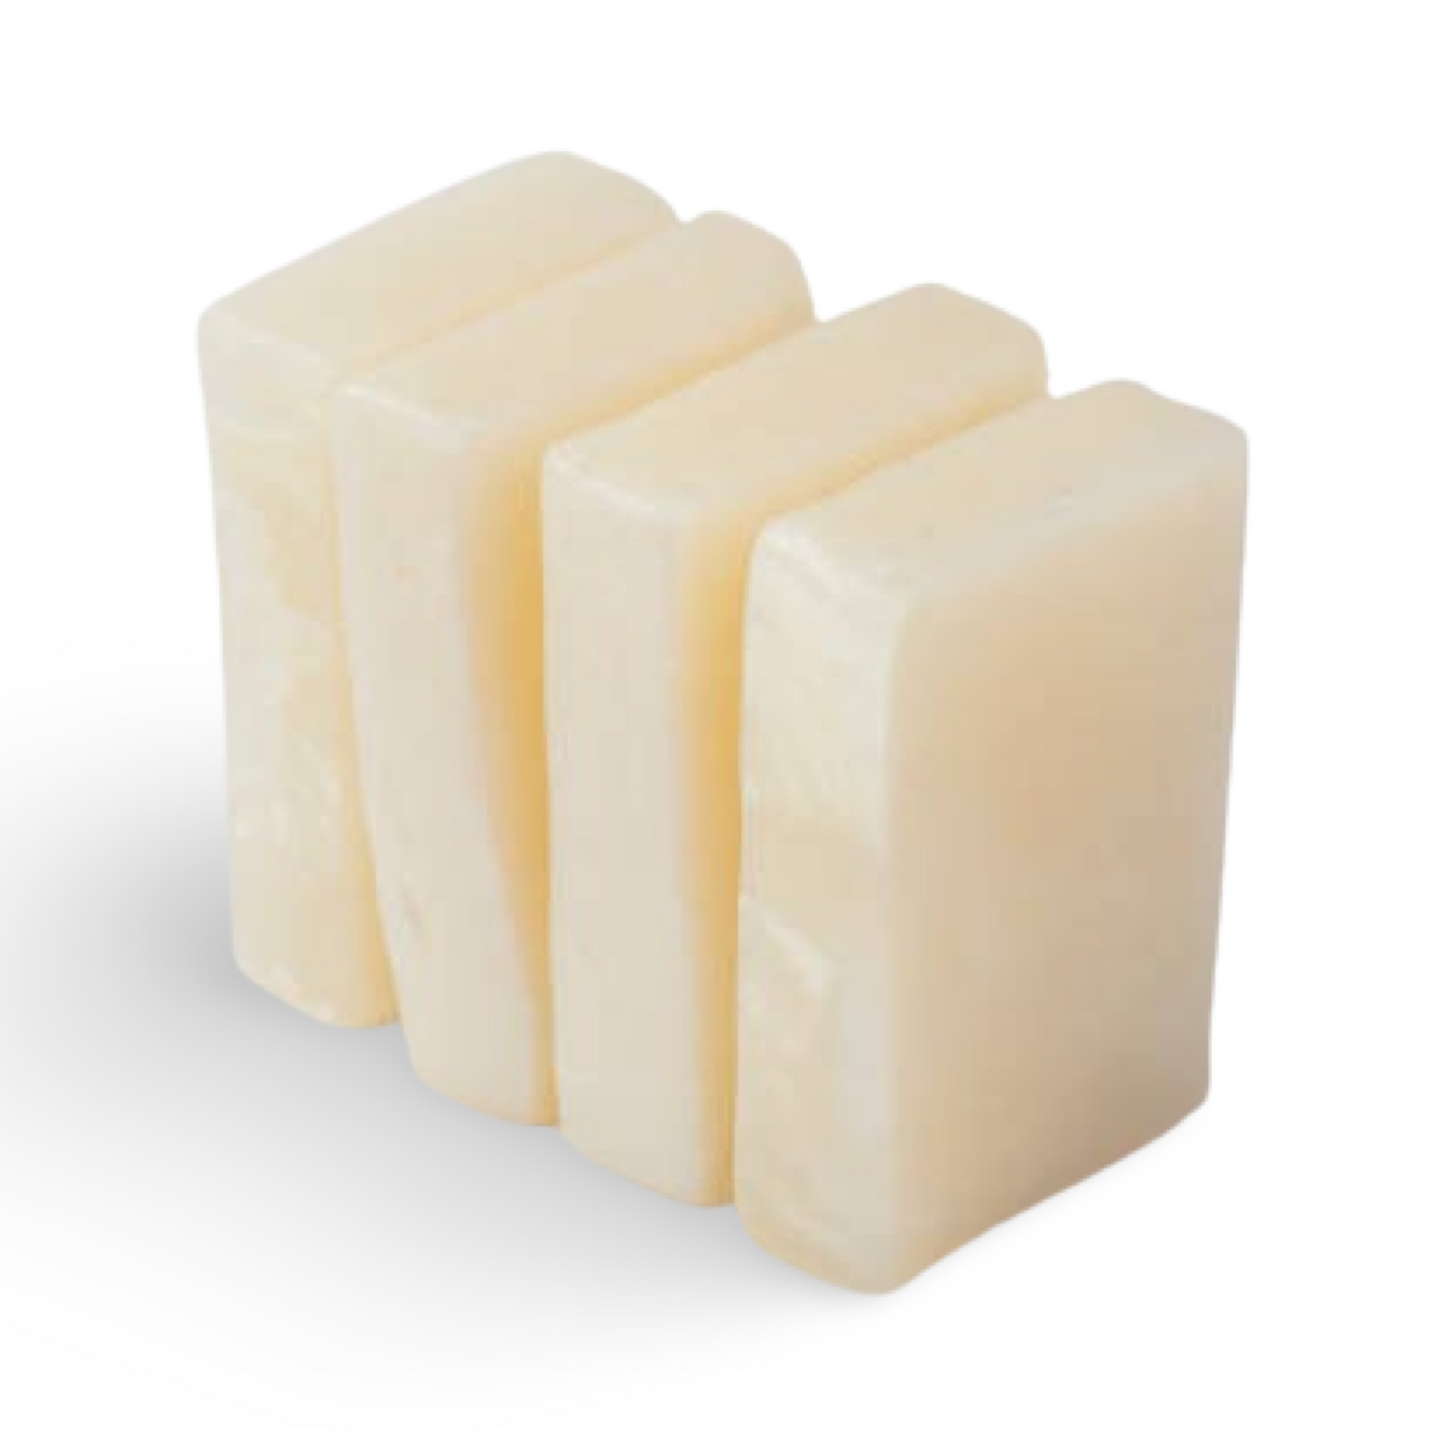 Radiance anti aging facial soap enriched with hyaluronic acid, & retinol